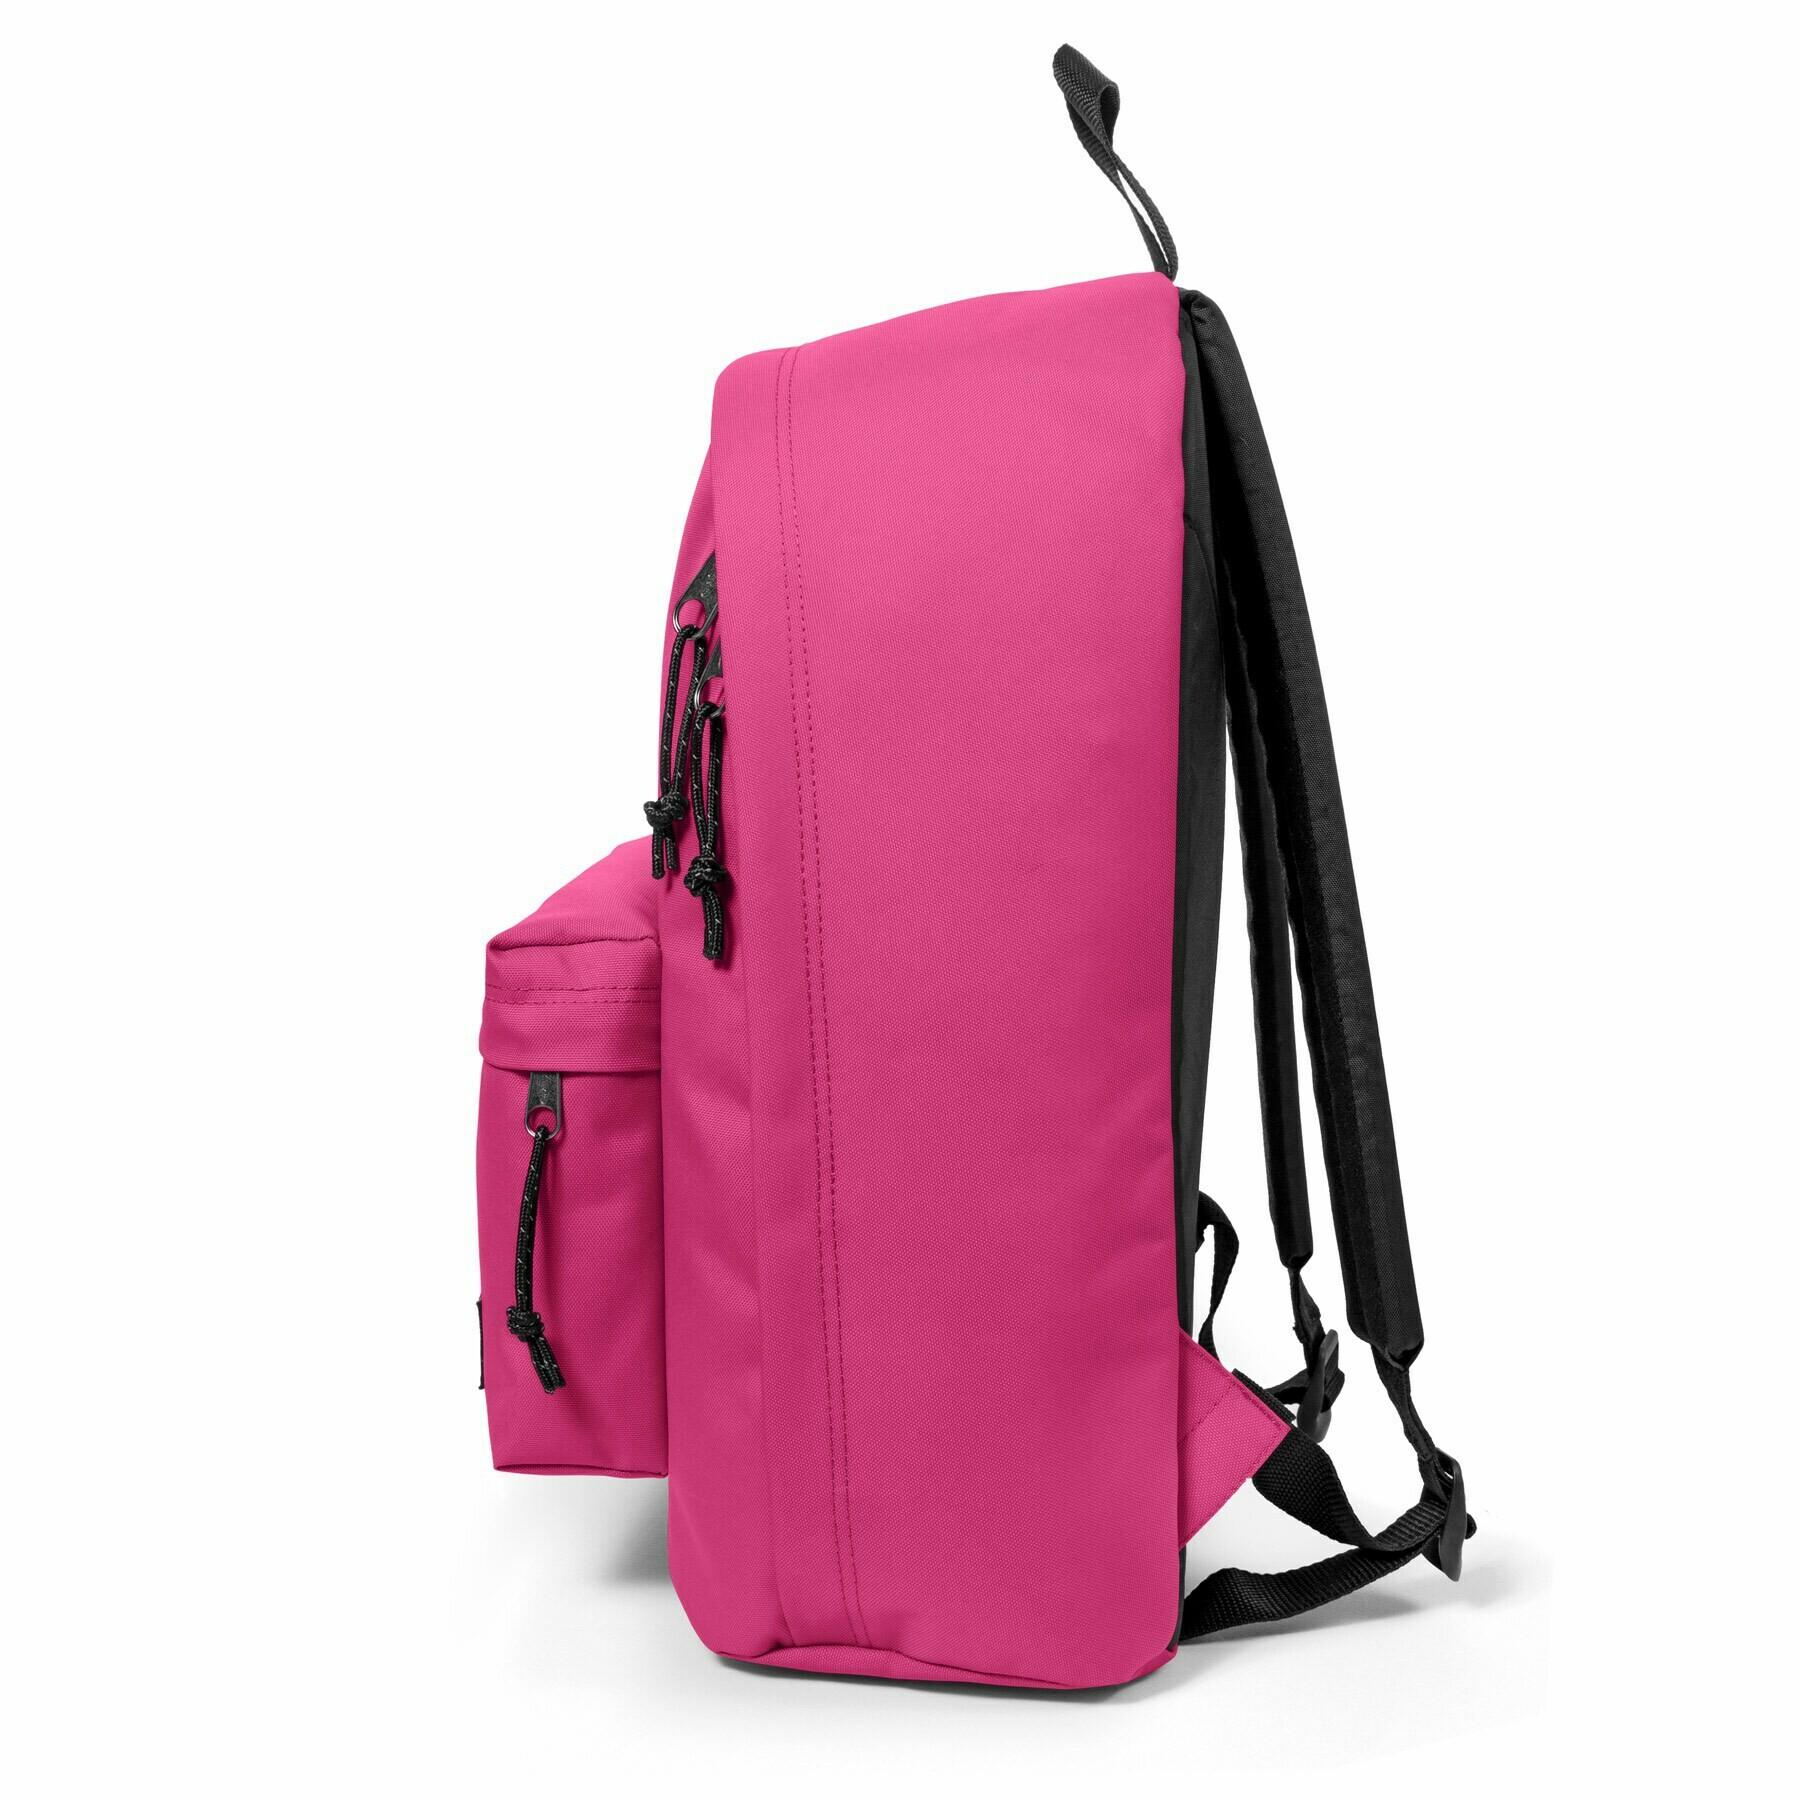 Backpack Eastpak Out Of Office